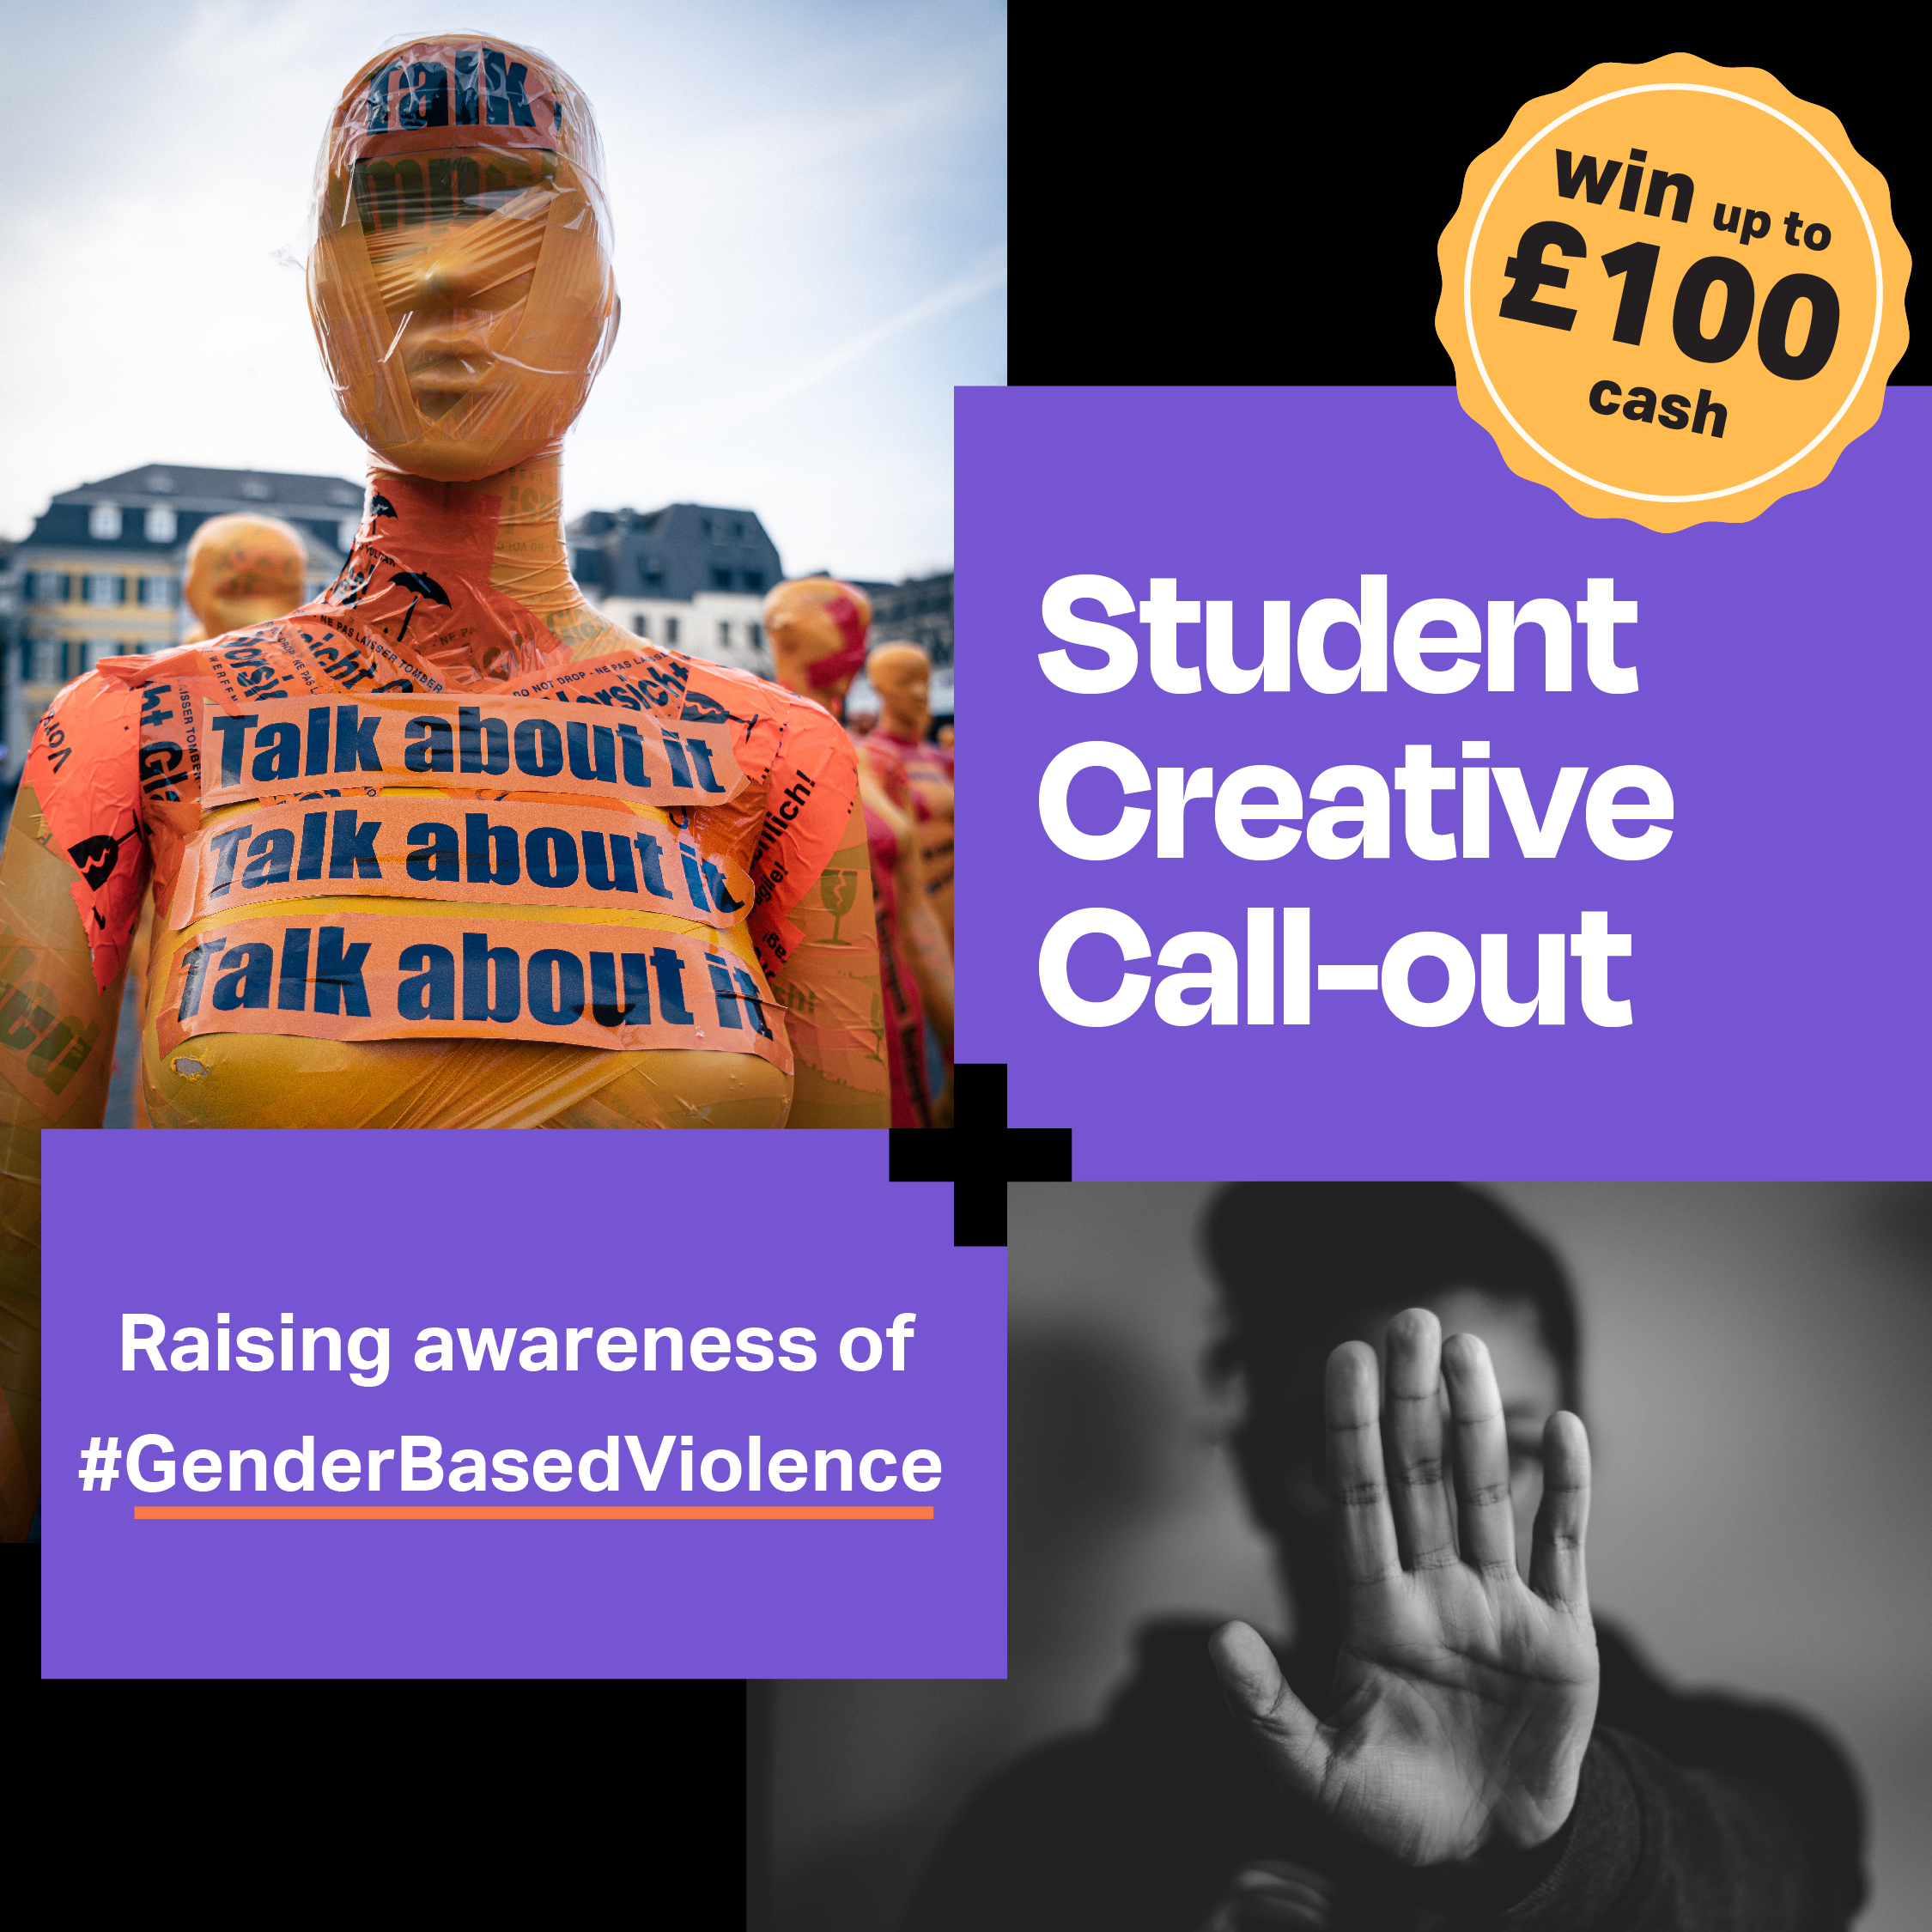 Student Creative Call-Out | Raising awareness of Gender Based Violence | Win up to 100 pounds cash